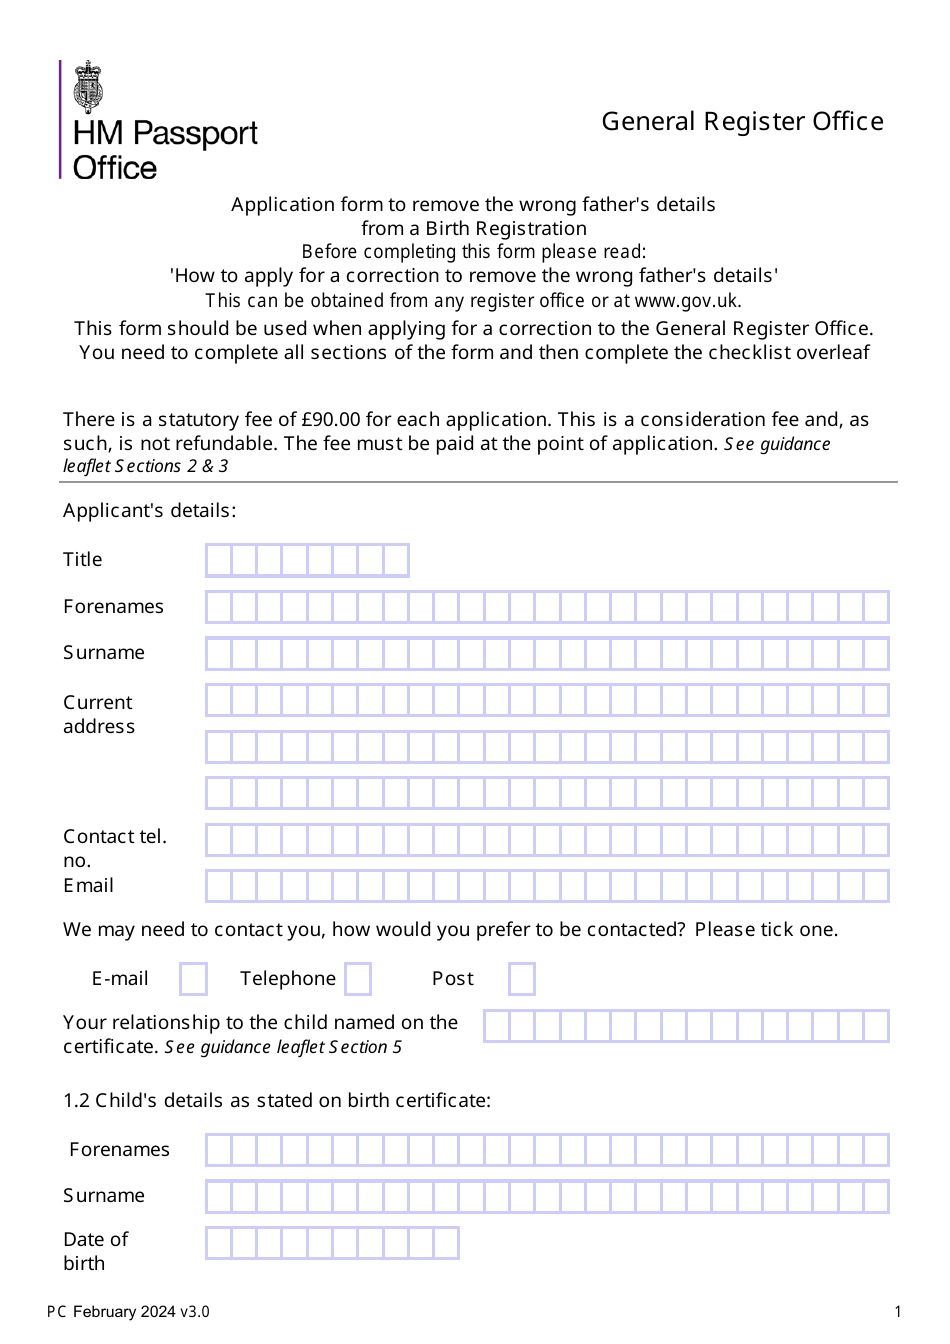 Application Form to Remove the Wrong Fathers Details From a Birth Registration - United Kingdom, Page 1